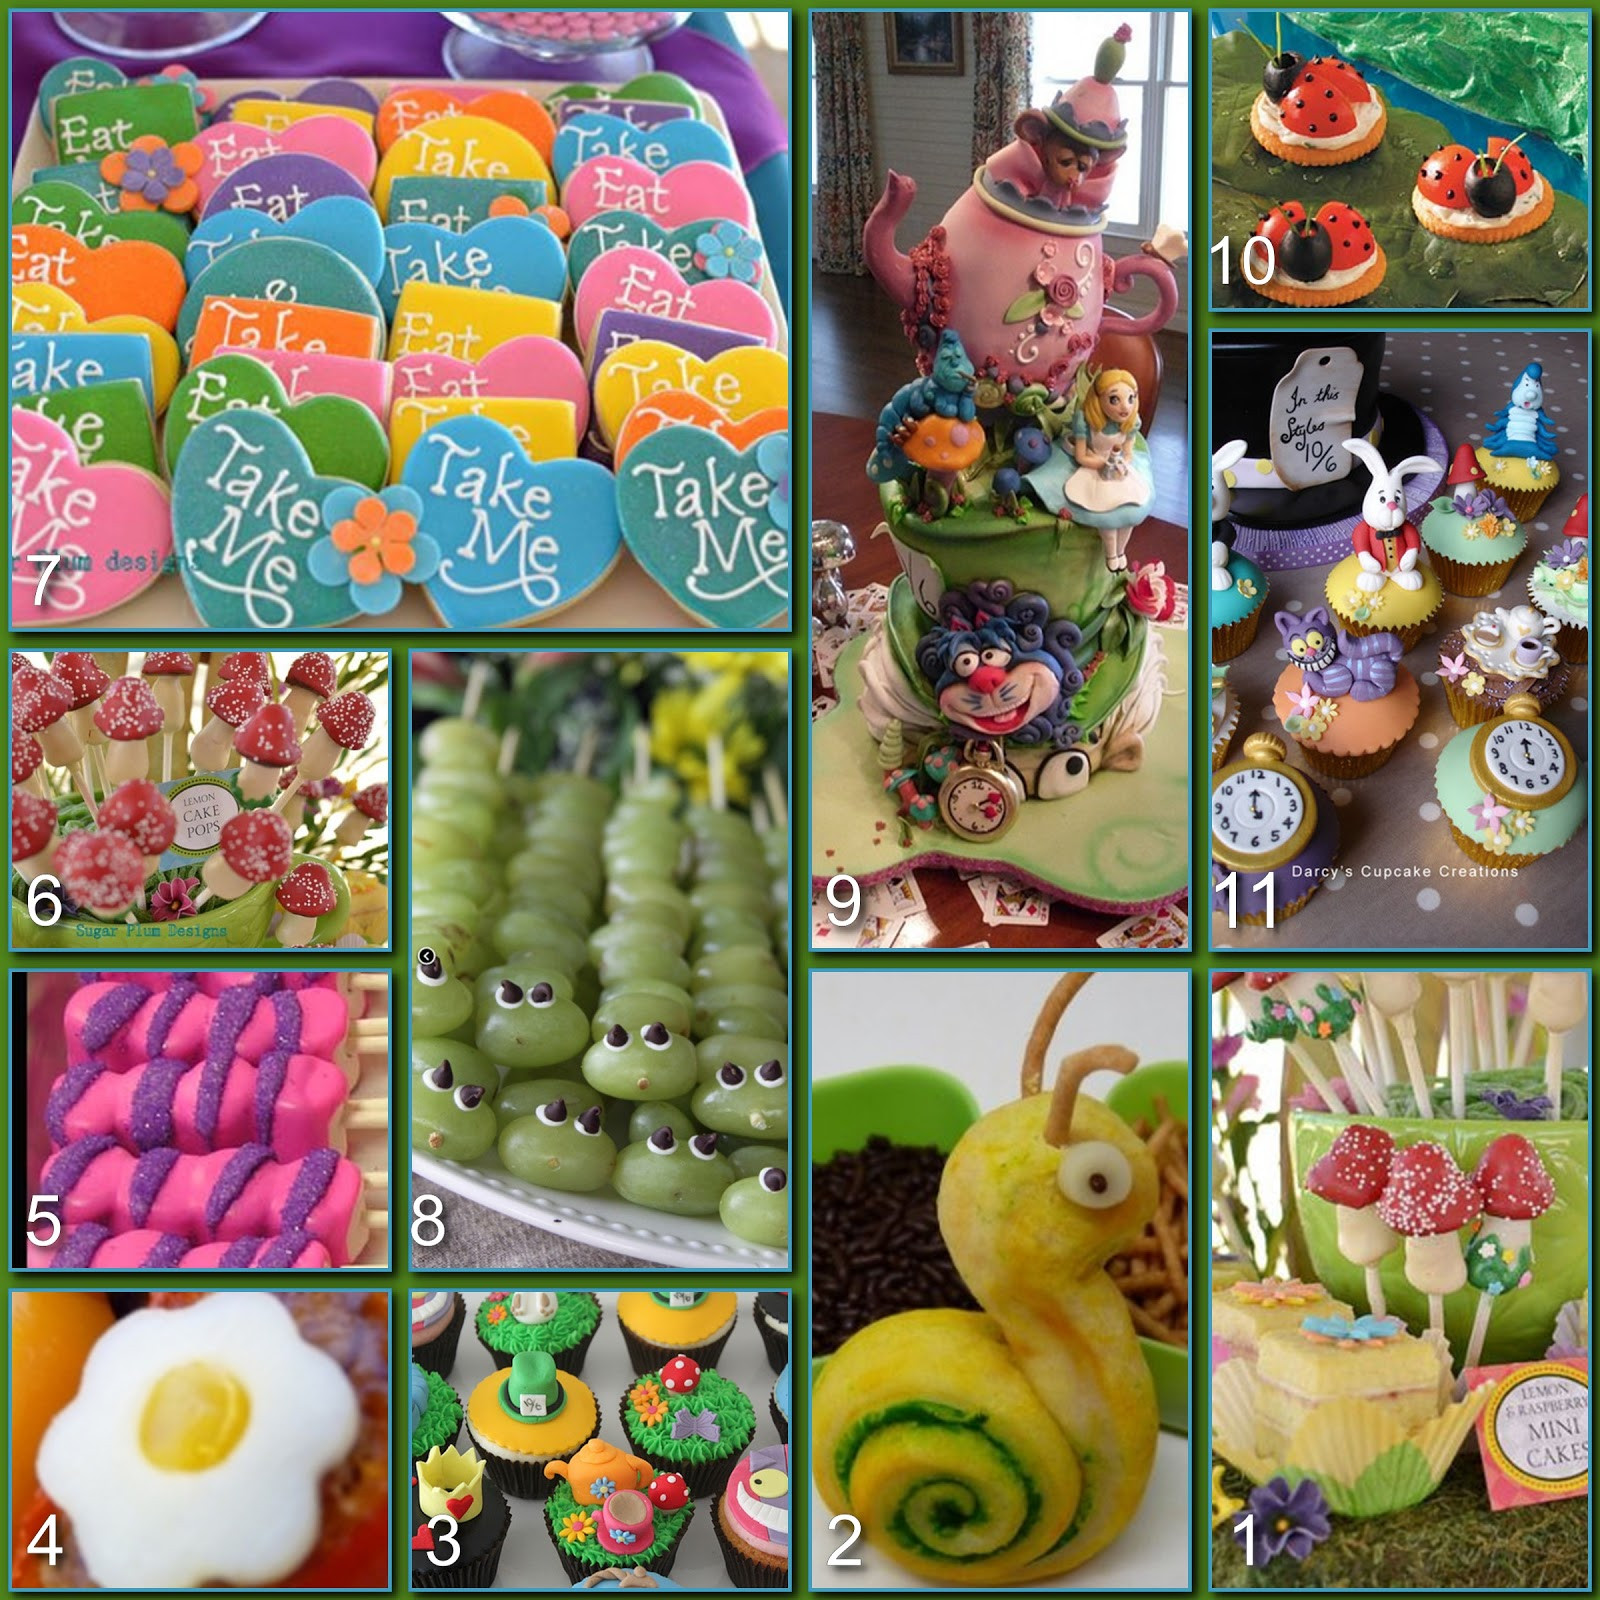 Mad Hatter Themed Tea Party Food Ideas
 Disney Donna Kay Disney Party Boards Mad Hatter Tea Party